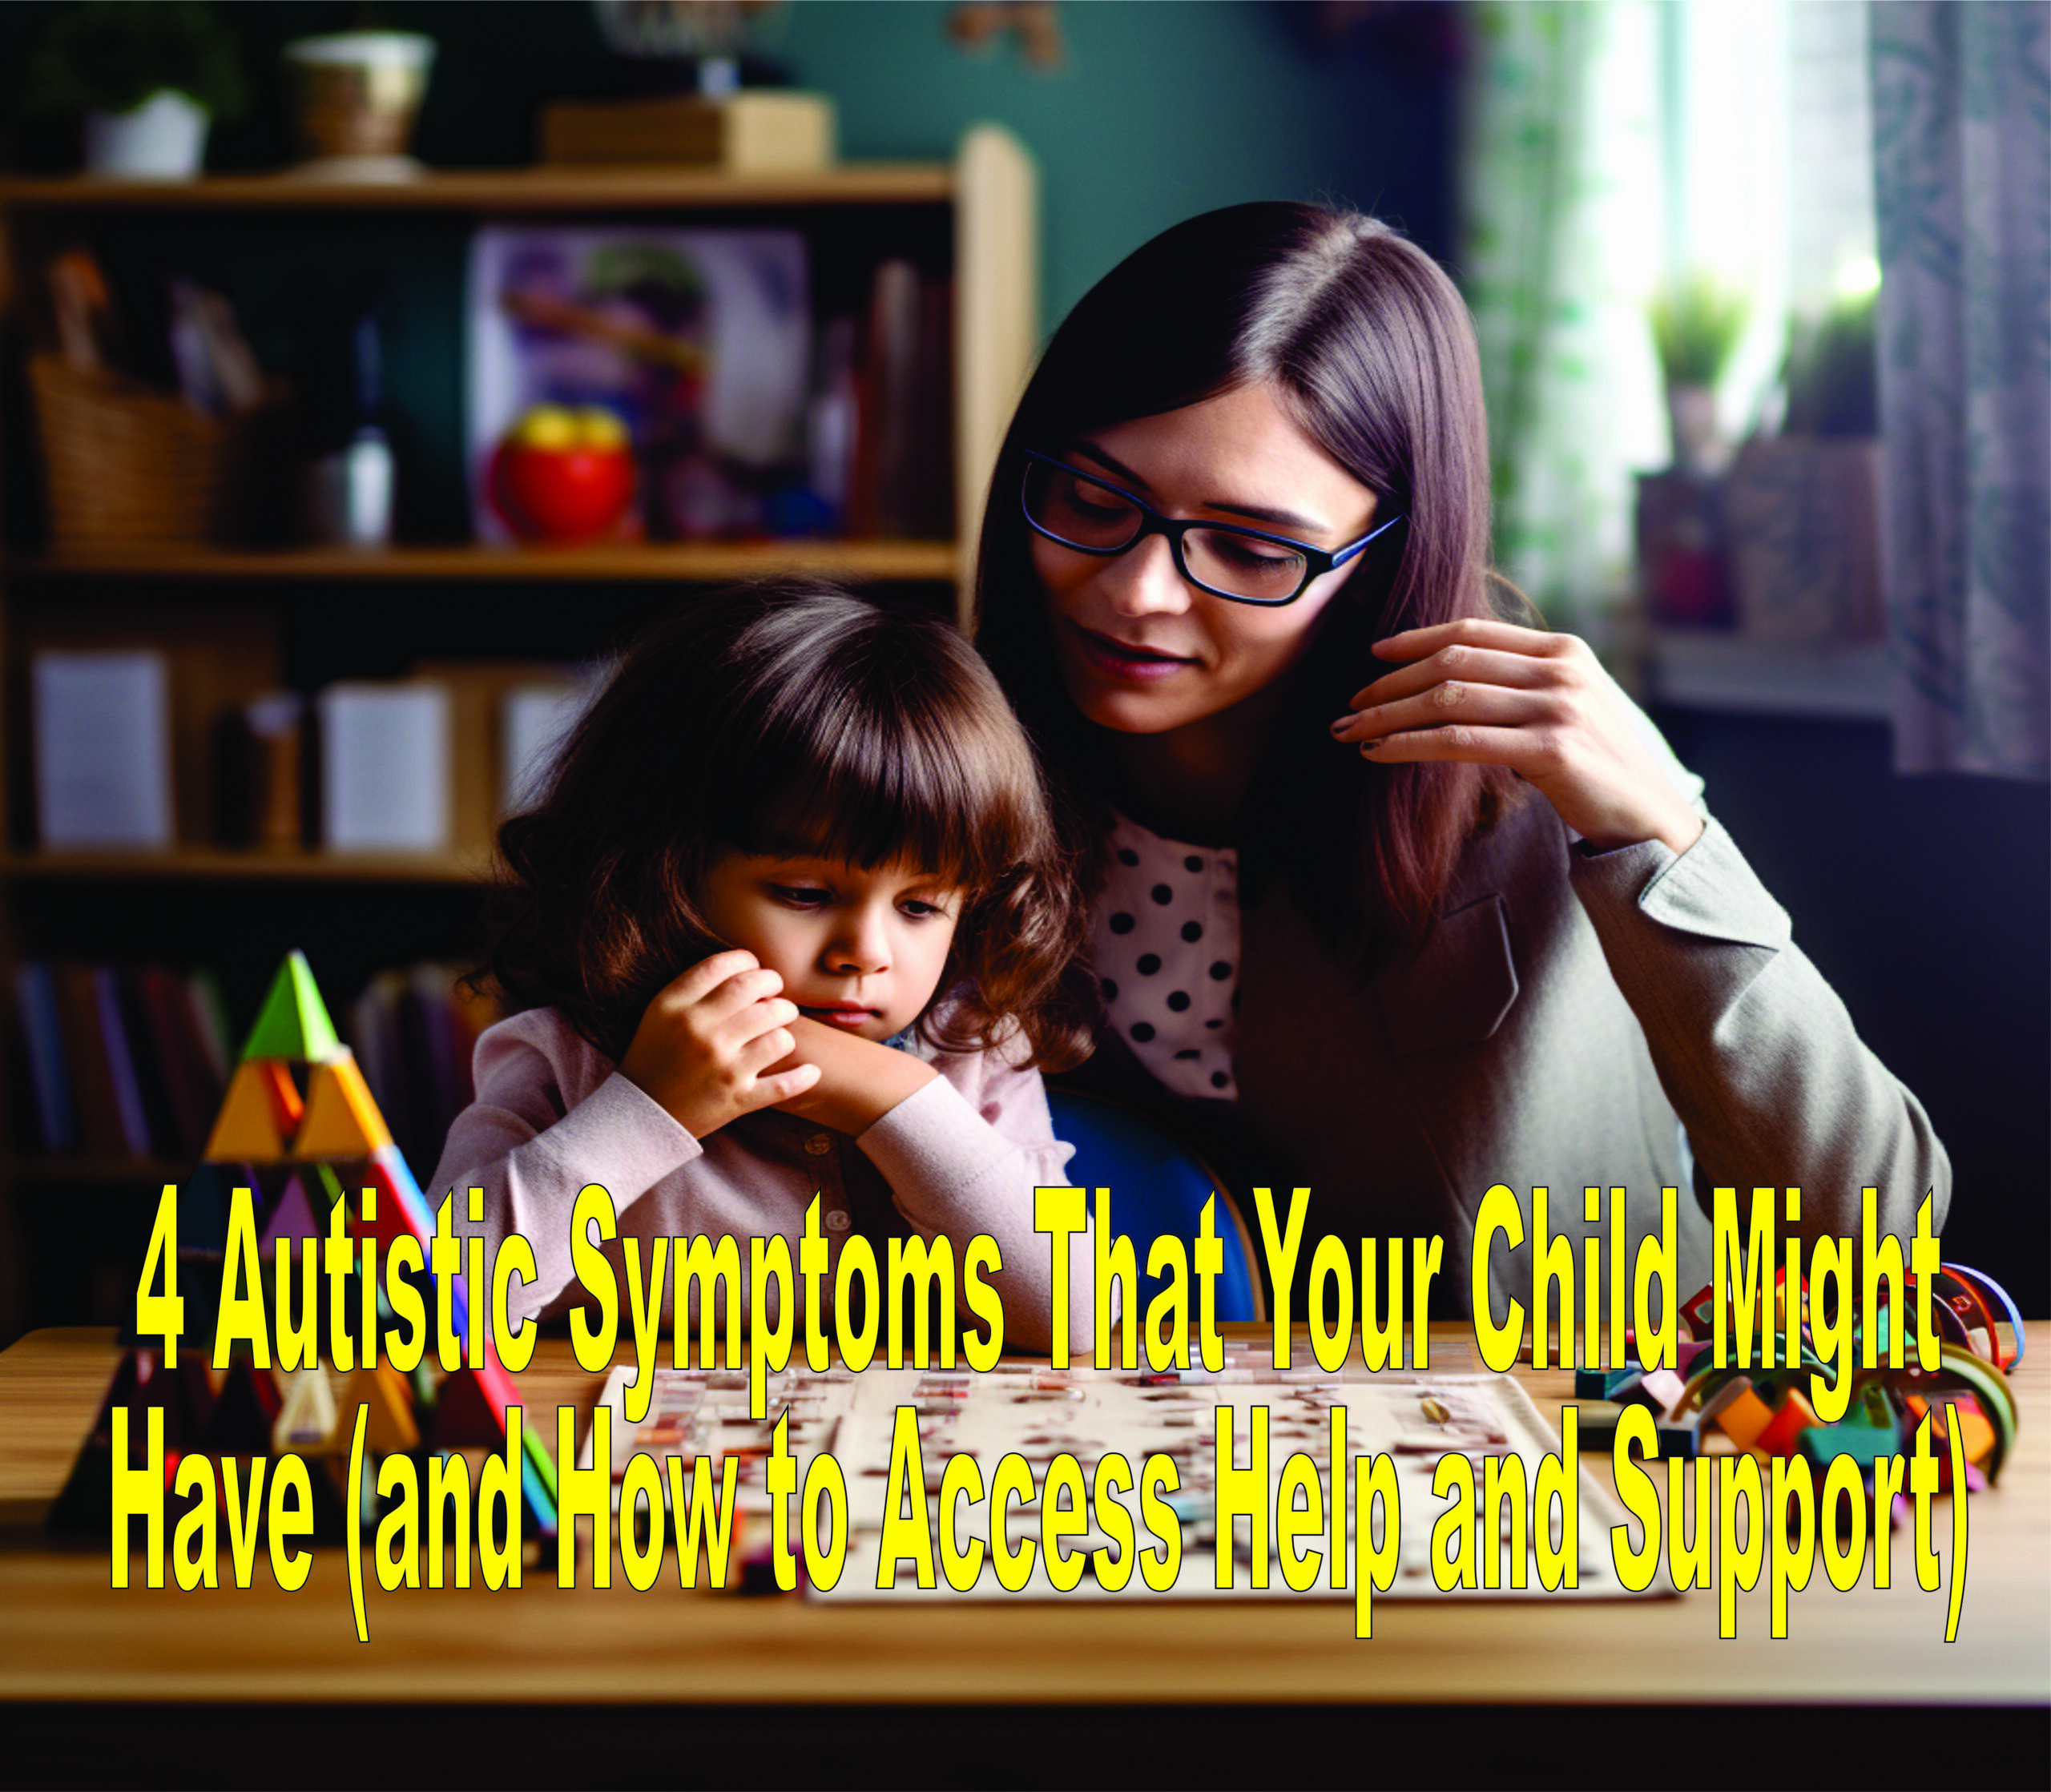 4 Autistic Symptoms That Your Child Might Have (and How To Access Help And Support)